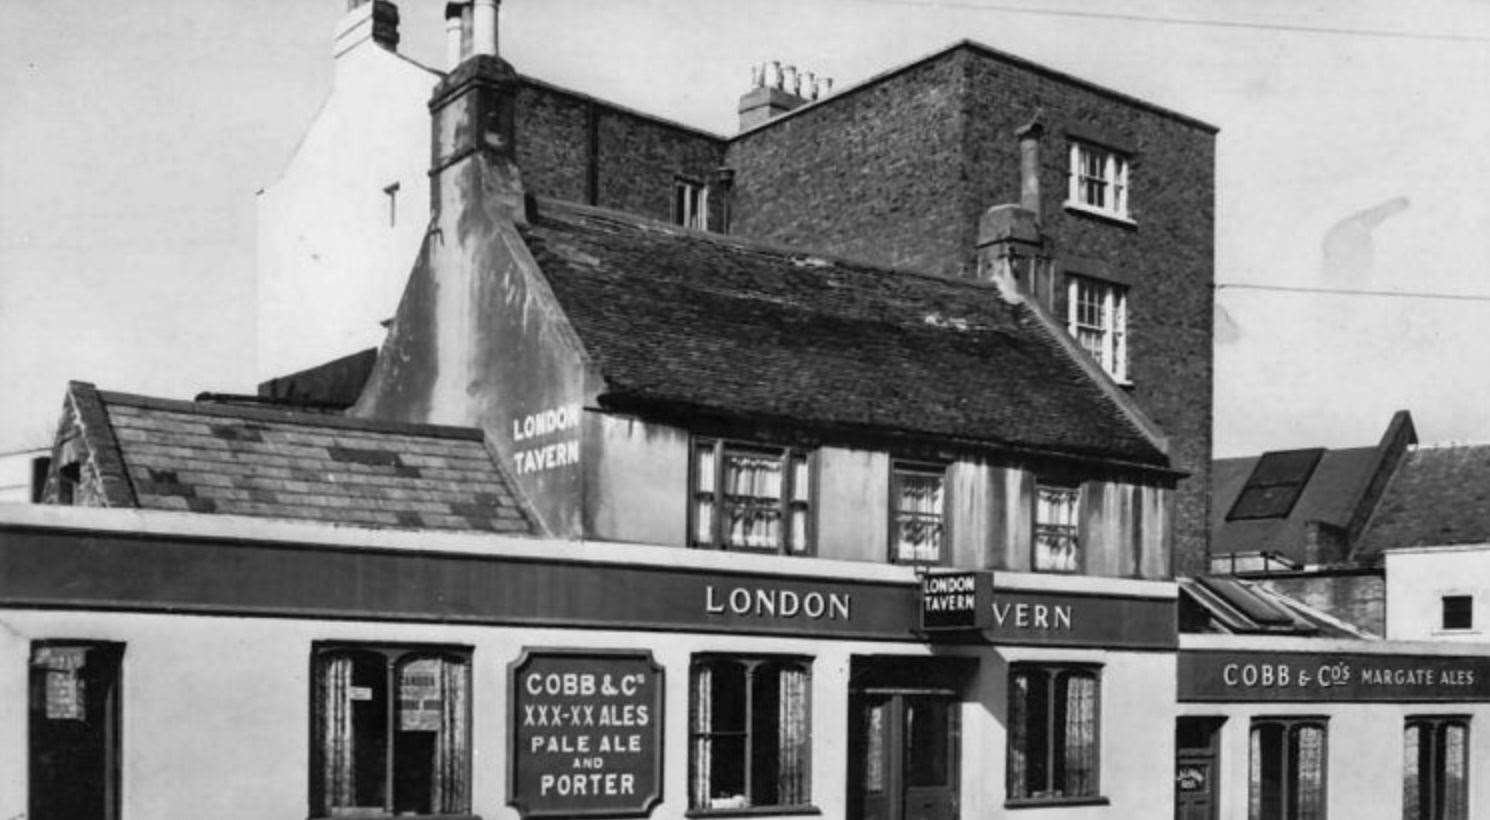 The London Tavern in Margate when under the banner of Cobb's in an undated photographPicture: dover-kent.com